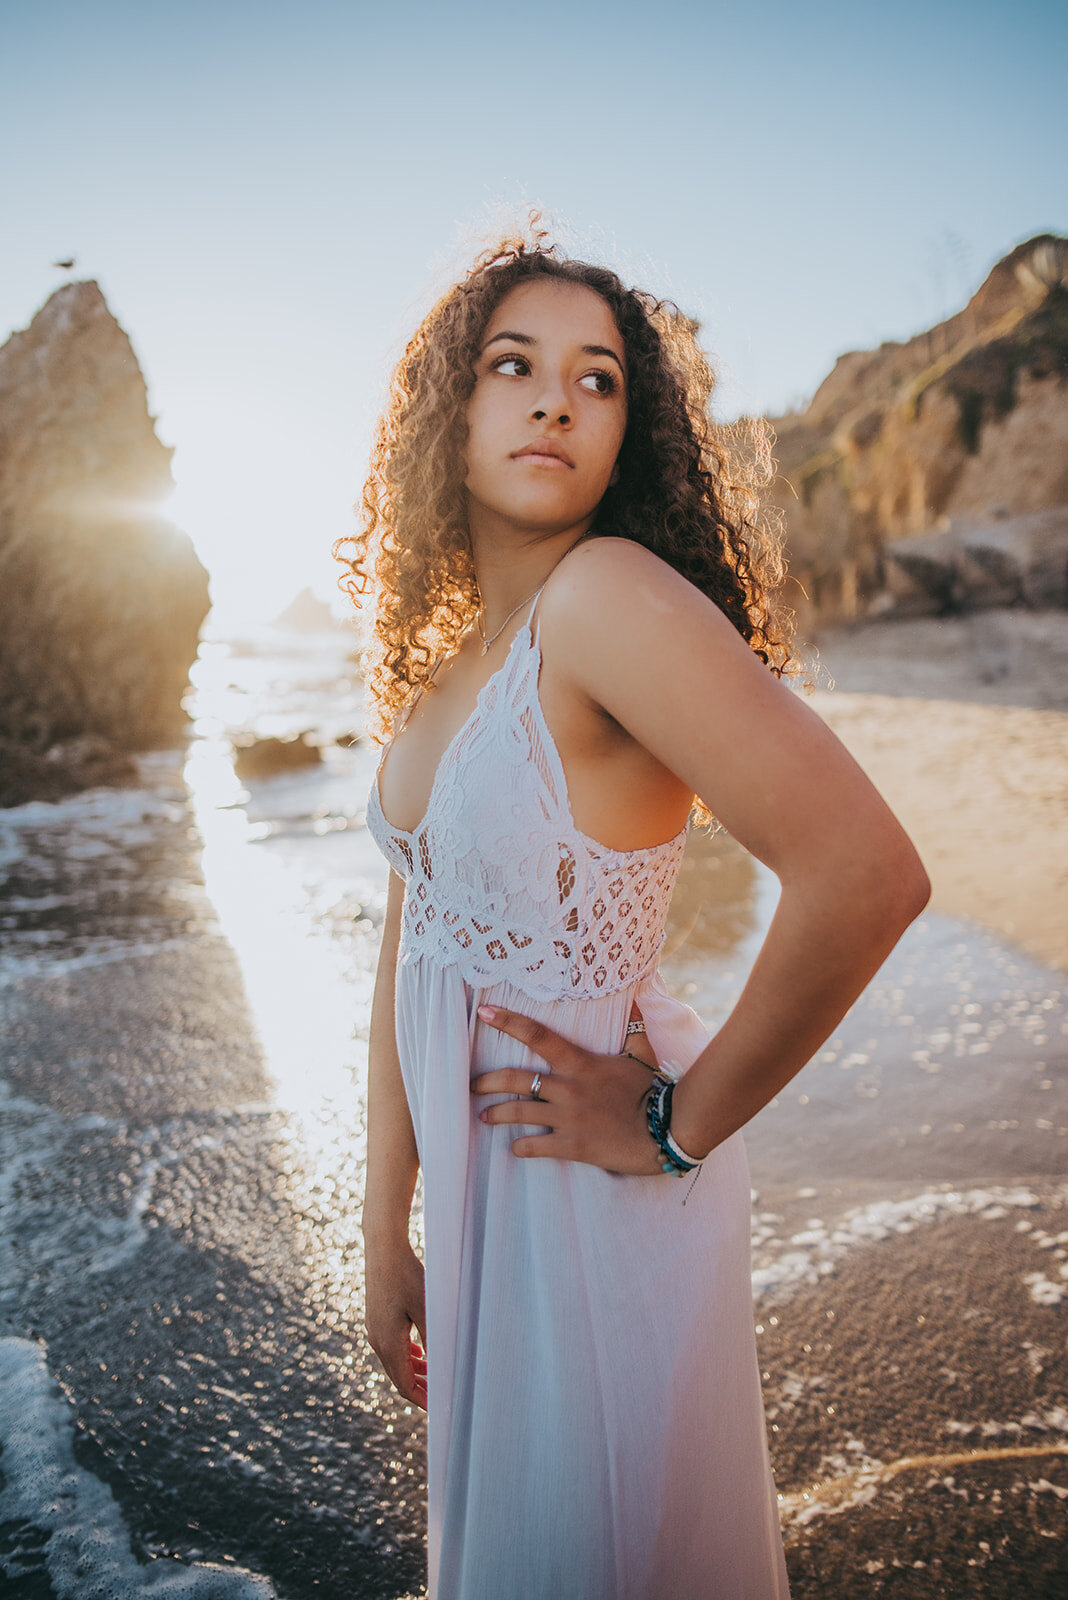 Olivia wears a white dress on El Matador beach during sunset and stares into the distance.